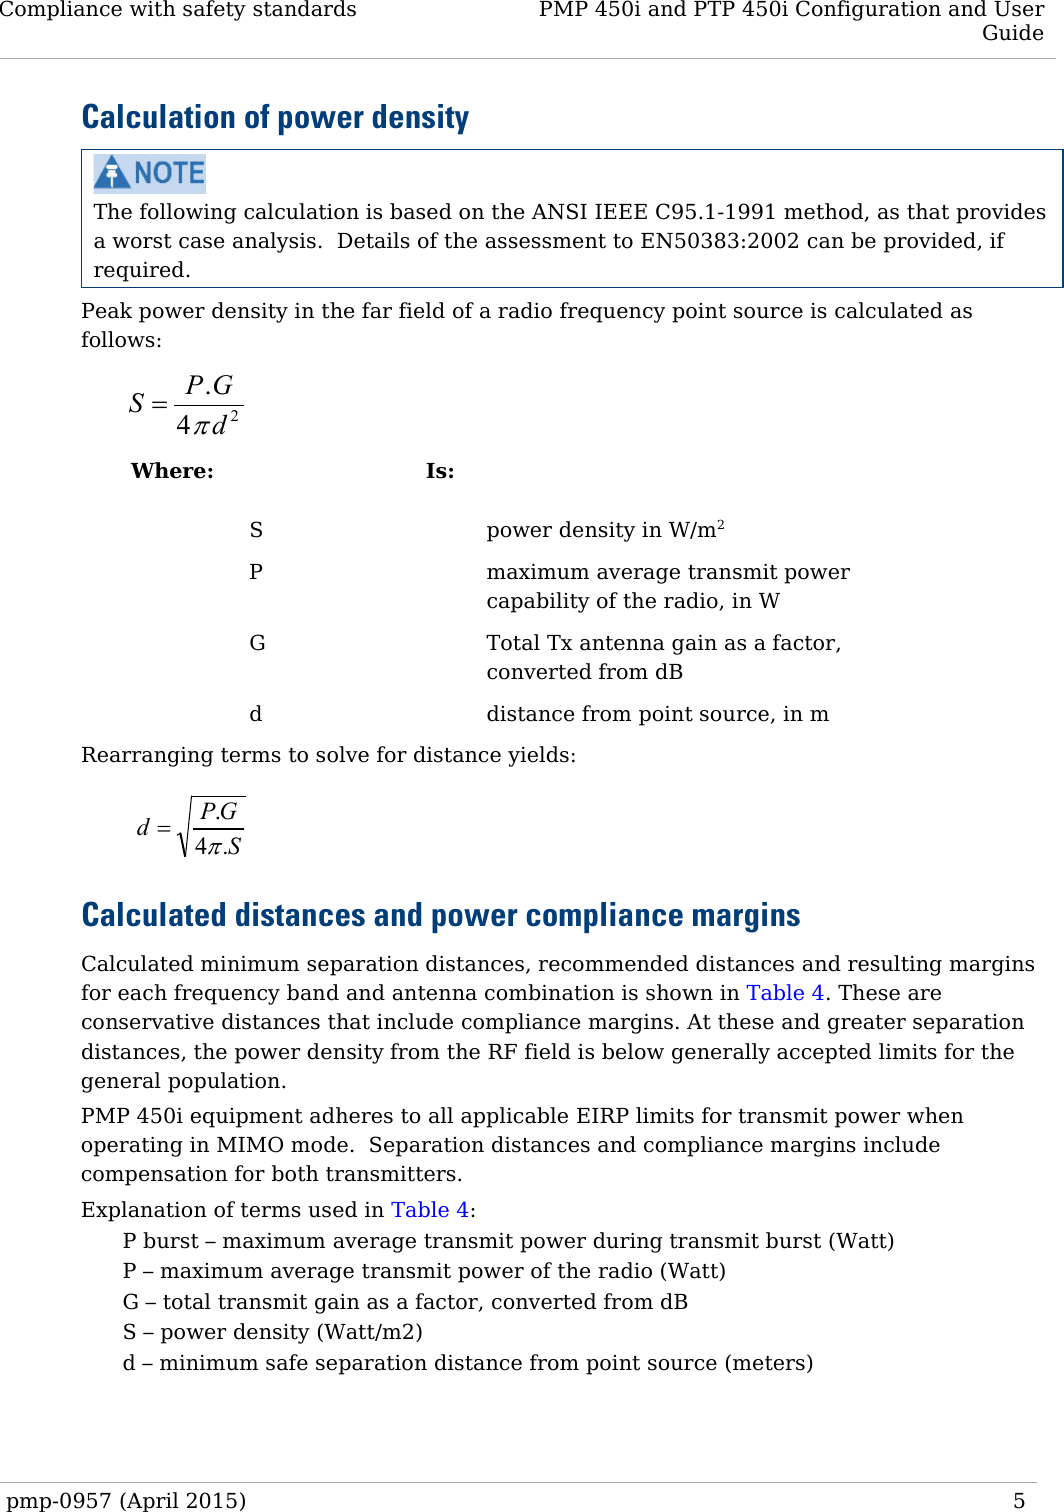 Compliance with safety standards PMP 450i and PTP 450i Configuration and User Guide  Calculation of power density  The following calculation is based on the ANSI IEEE C95.1-1991 method, as that provides a worst case analysis.  Details of the assessment to EN50383:2002 can be provided, if required. Peak power density in the far field of a radio frequency point source is calculated as follows:    Where:  Is:    S    power density in W/m2   P    maximum average transmit power capability of the radio, in W   G    Total Tx antenna gain as a factor, converted from dB   d    distance from point source, in m Rearranging terms to solve for distance yields:    Calculated distances and power compliance margins Calculated minimum separation distances, recommended distances and resulting margins for each frequency band and antenna combination is shown in Table 4. These are conservative distances that include compliance margins. At these and greater separation distances, the power density from the RF field is below generally accepted limits for the general population. PMP 450i equipment adheres to all applicable EIRP limits for transmit power when operating in MIMO mode.  Separation distances and compliance margins include compensation for both transmitters. Explanation of terms used in Table 4: P burst – maximum average transmit power during transmit burst (Watt) P – maximum average transmit power of the radio (Watt) G – total transmit gain as a factor, converted from dB S – power density (Watt/m2) d – minimum safe separation distance from point source (meters)  24.dGPSπ=SGPd.4.π=pmp-0957 (April 2015)   5  